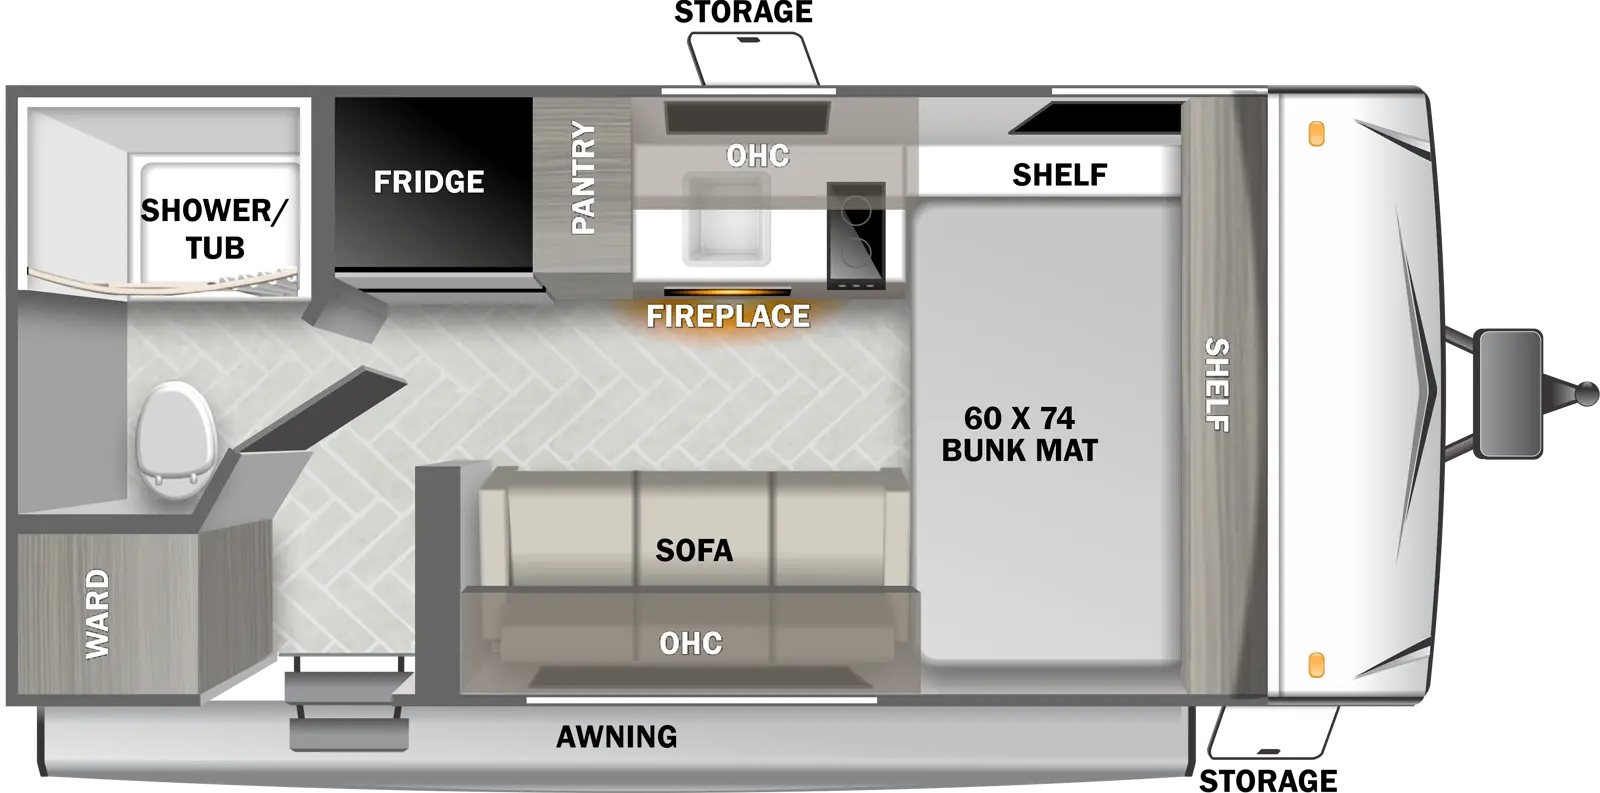 The T157FBCE has zero slideouts and one entry. Exterior features an awning and storage. Interior layout front to back: side-facing bunk mat with shelf along front wall and off-door side; door side sofa and overhead cabinet, and entry door; off-door side kitchen counter with cooktop, sink, overhead cabinet, pantry and refrigerator; rear wardrobe, and bathroom with toilet and shower/tub only.